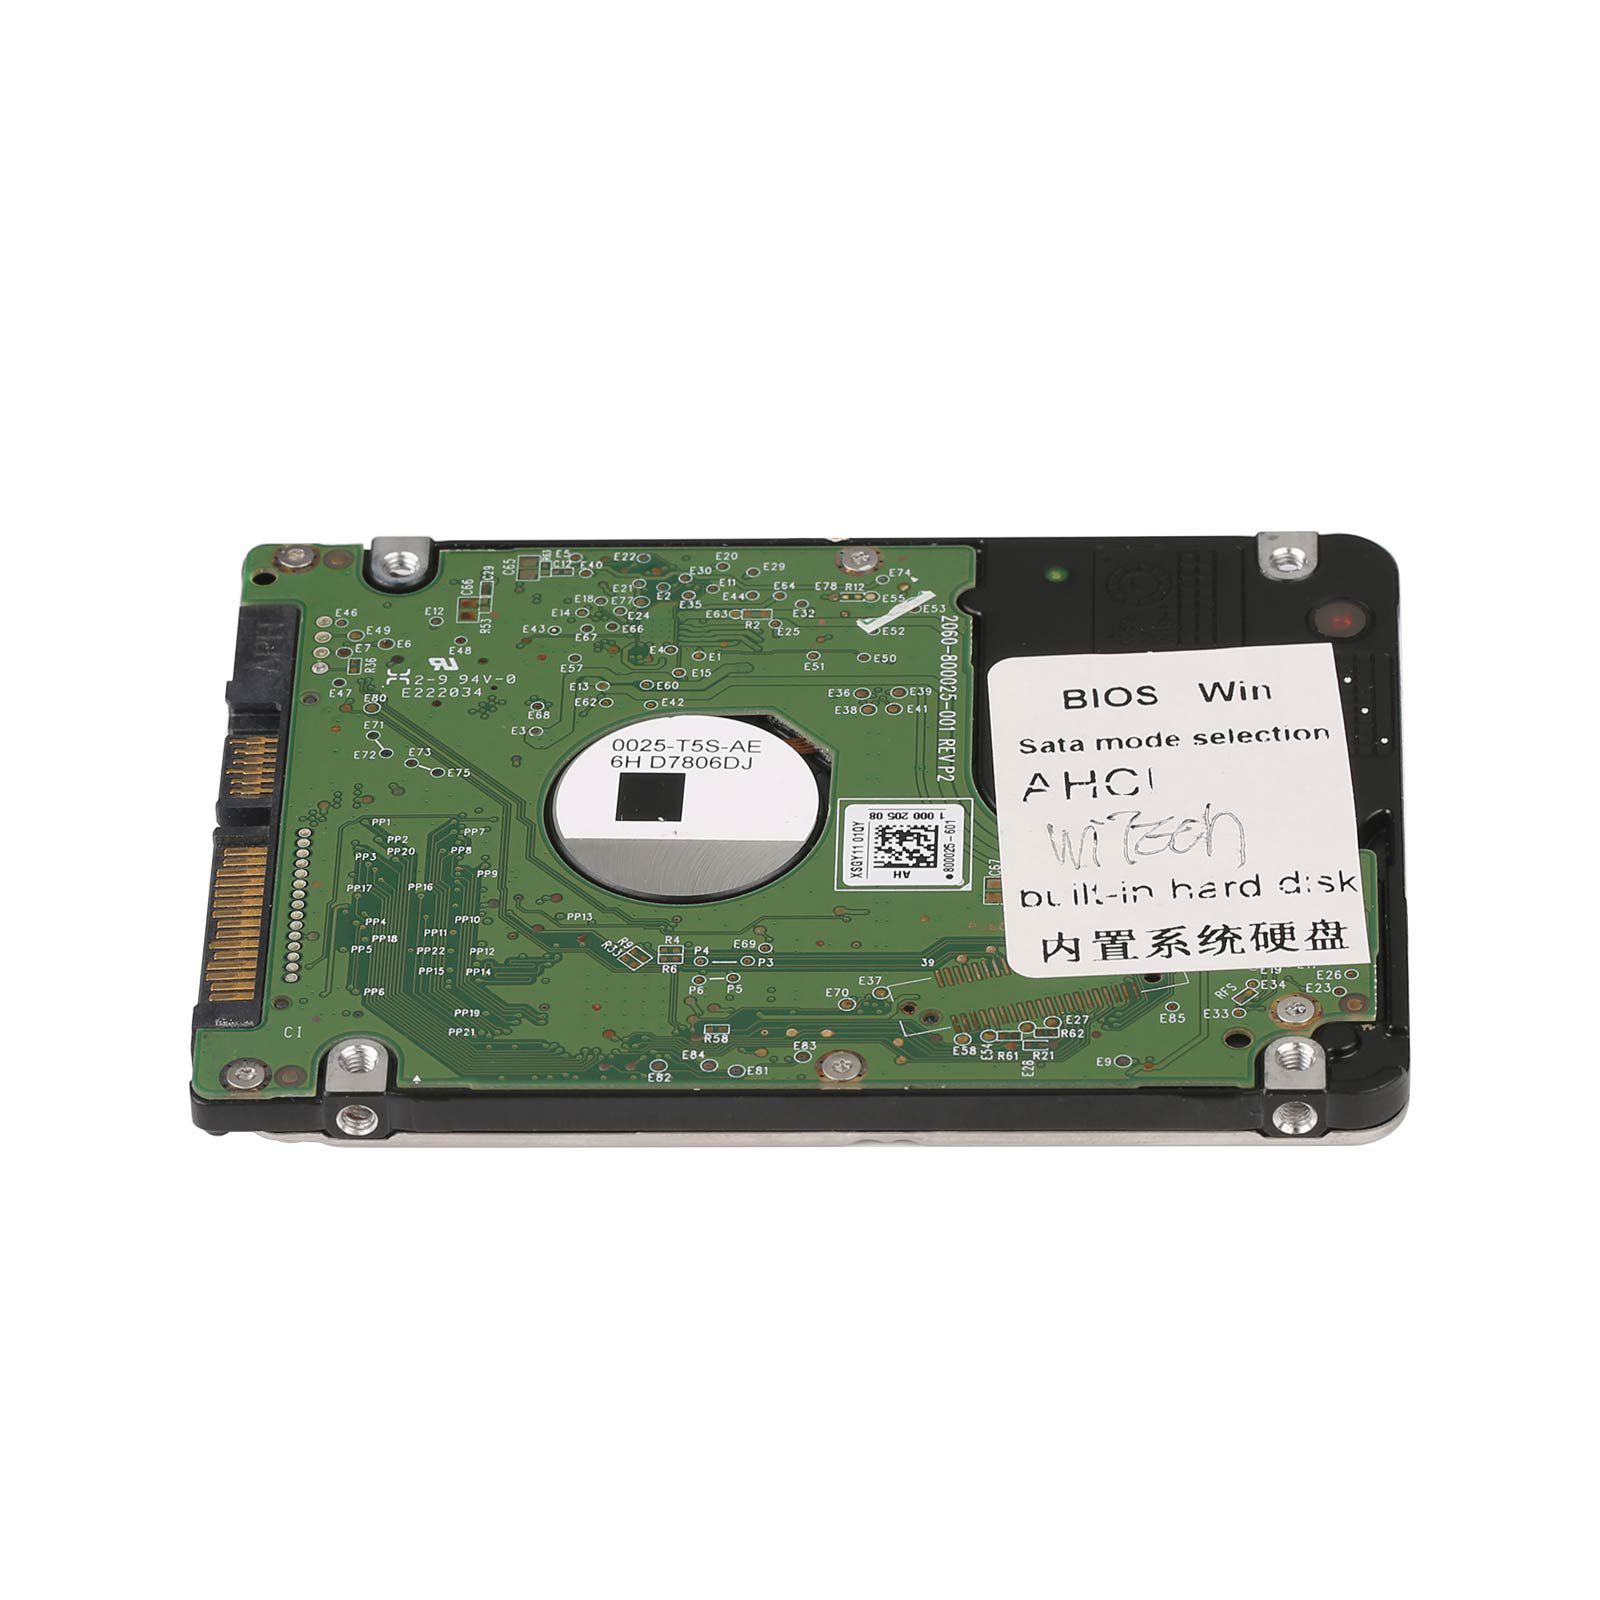 17.04.27 WiTech MicroPod 2 Software 320G Hard Disk